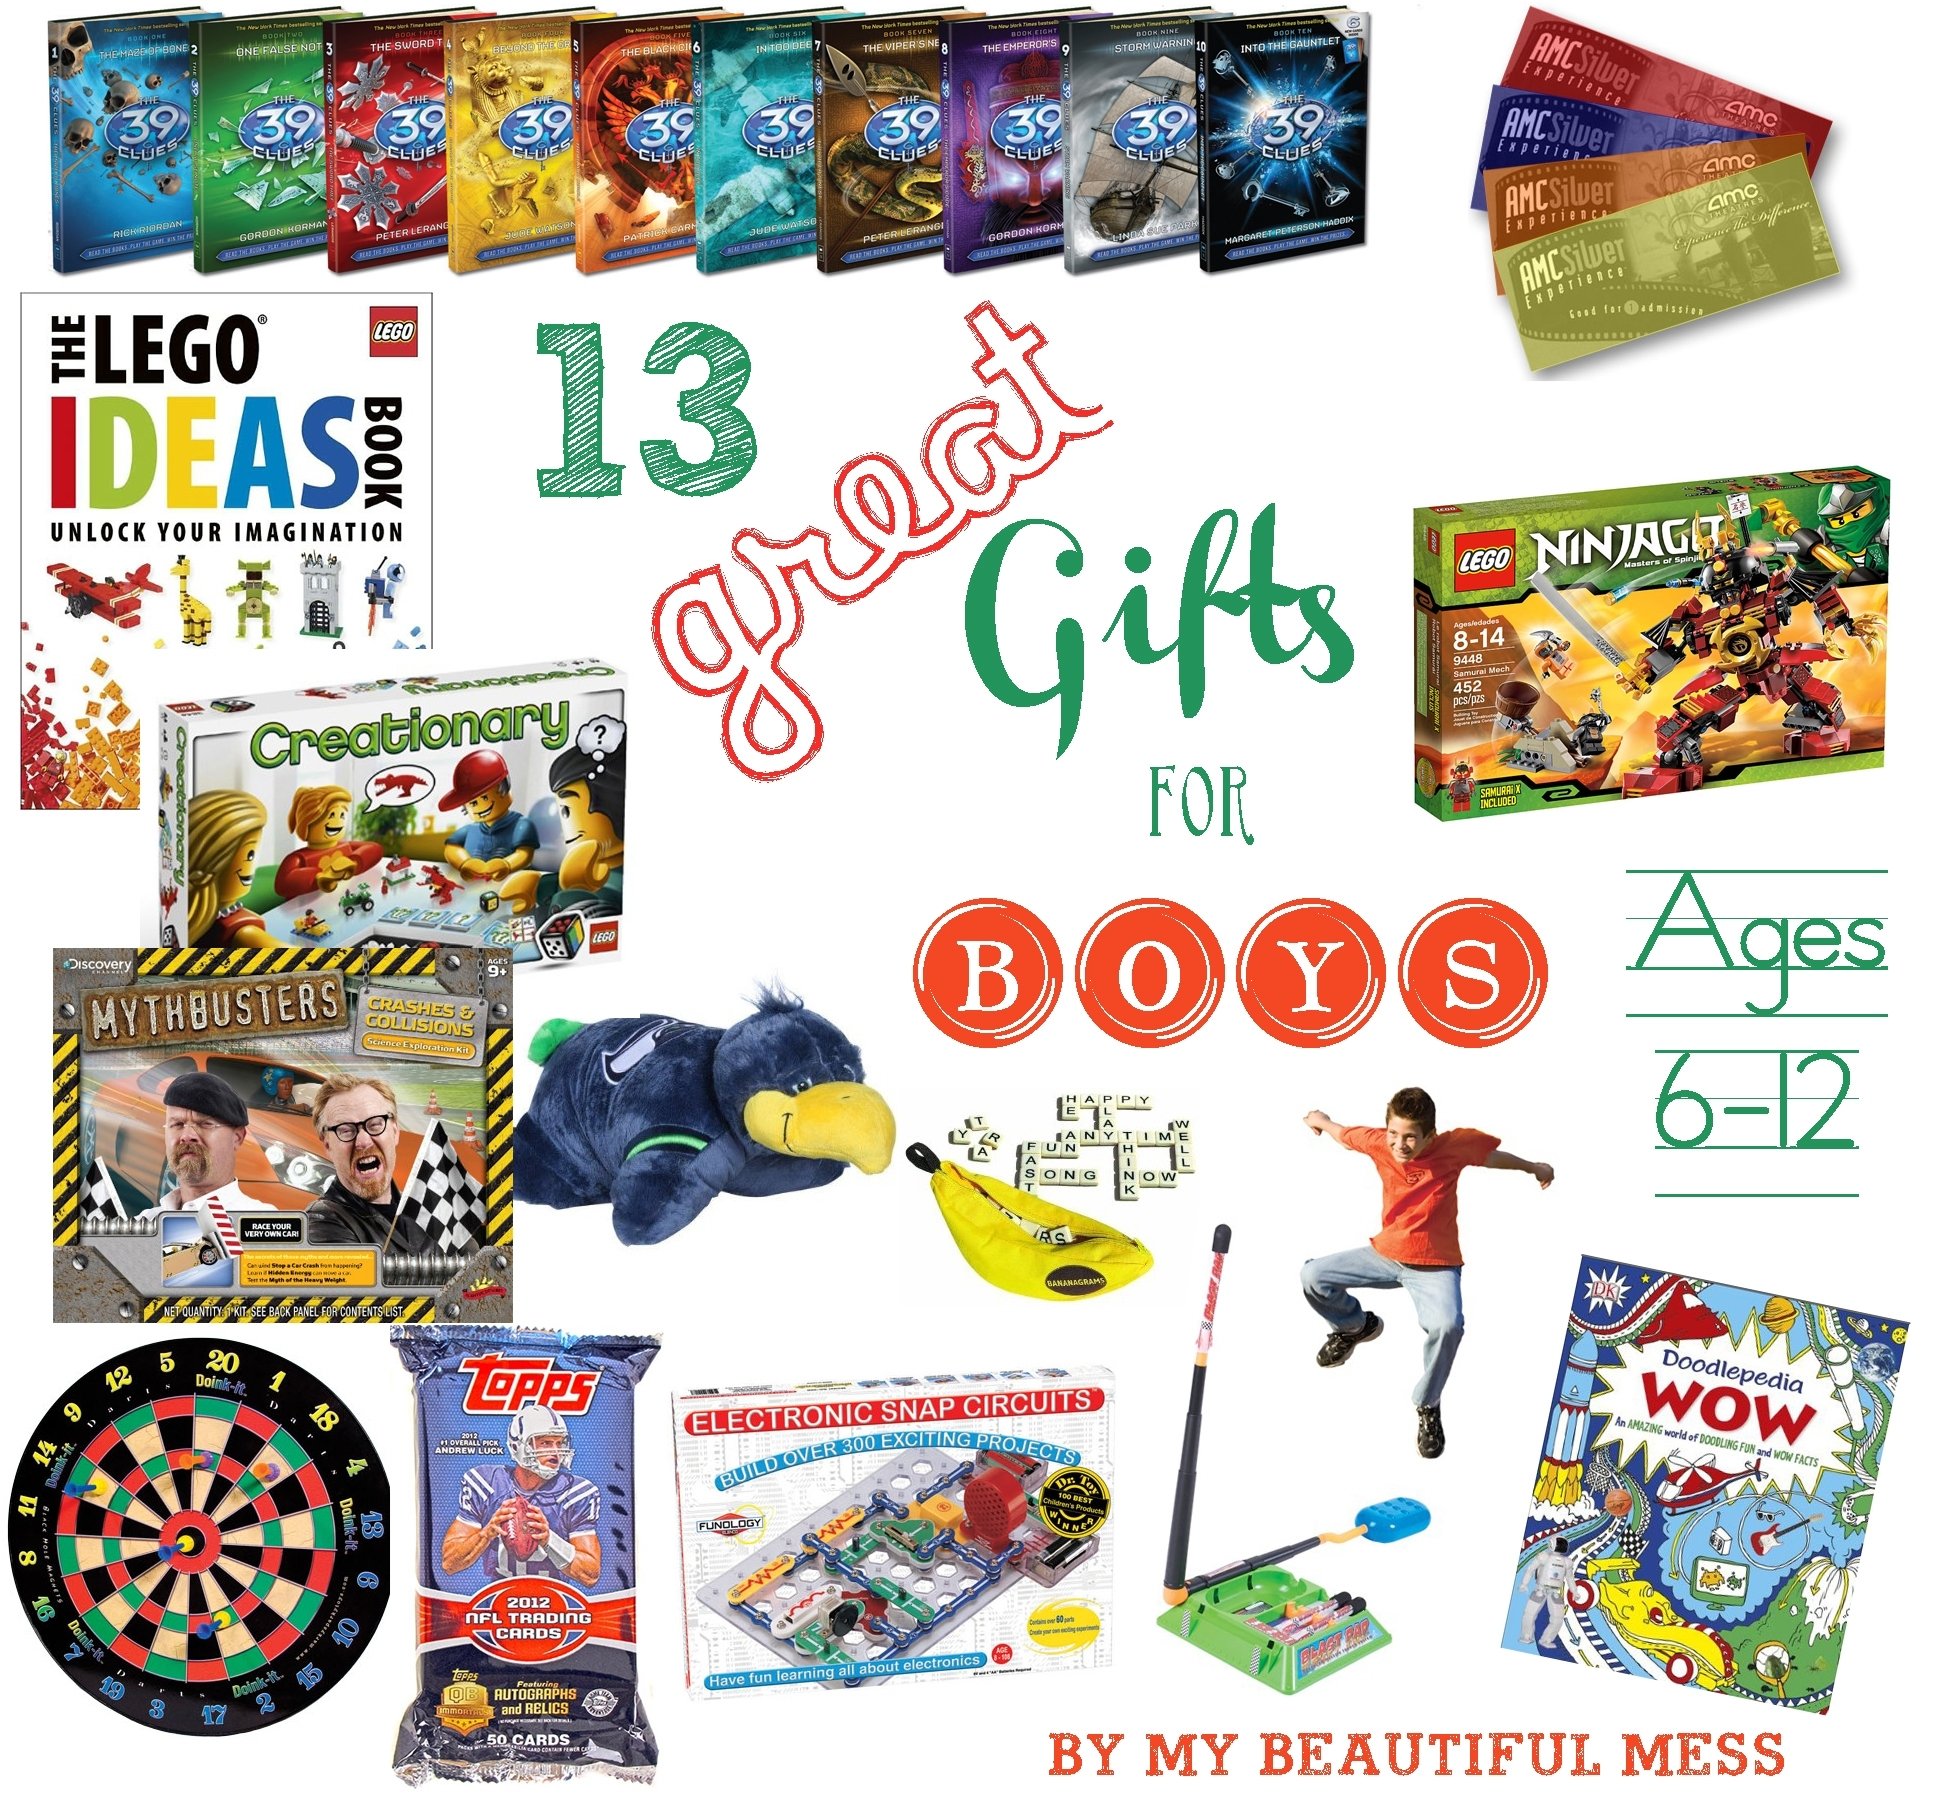 10 Attractive 12 Year Old Boy Christmas Gift Ideas 13 great gift ideas for grade school aged boys ages 6 12 5 2022